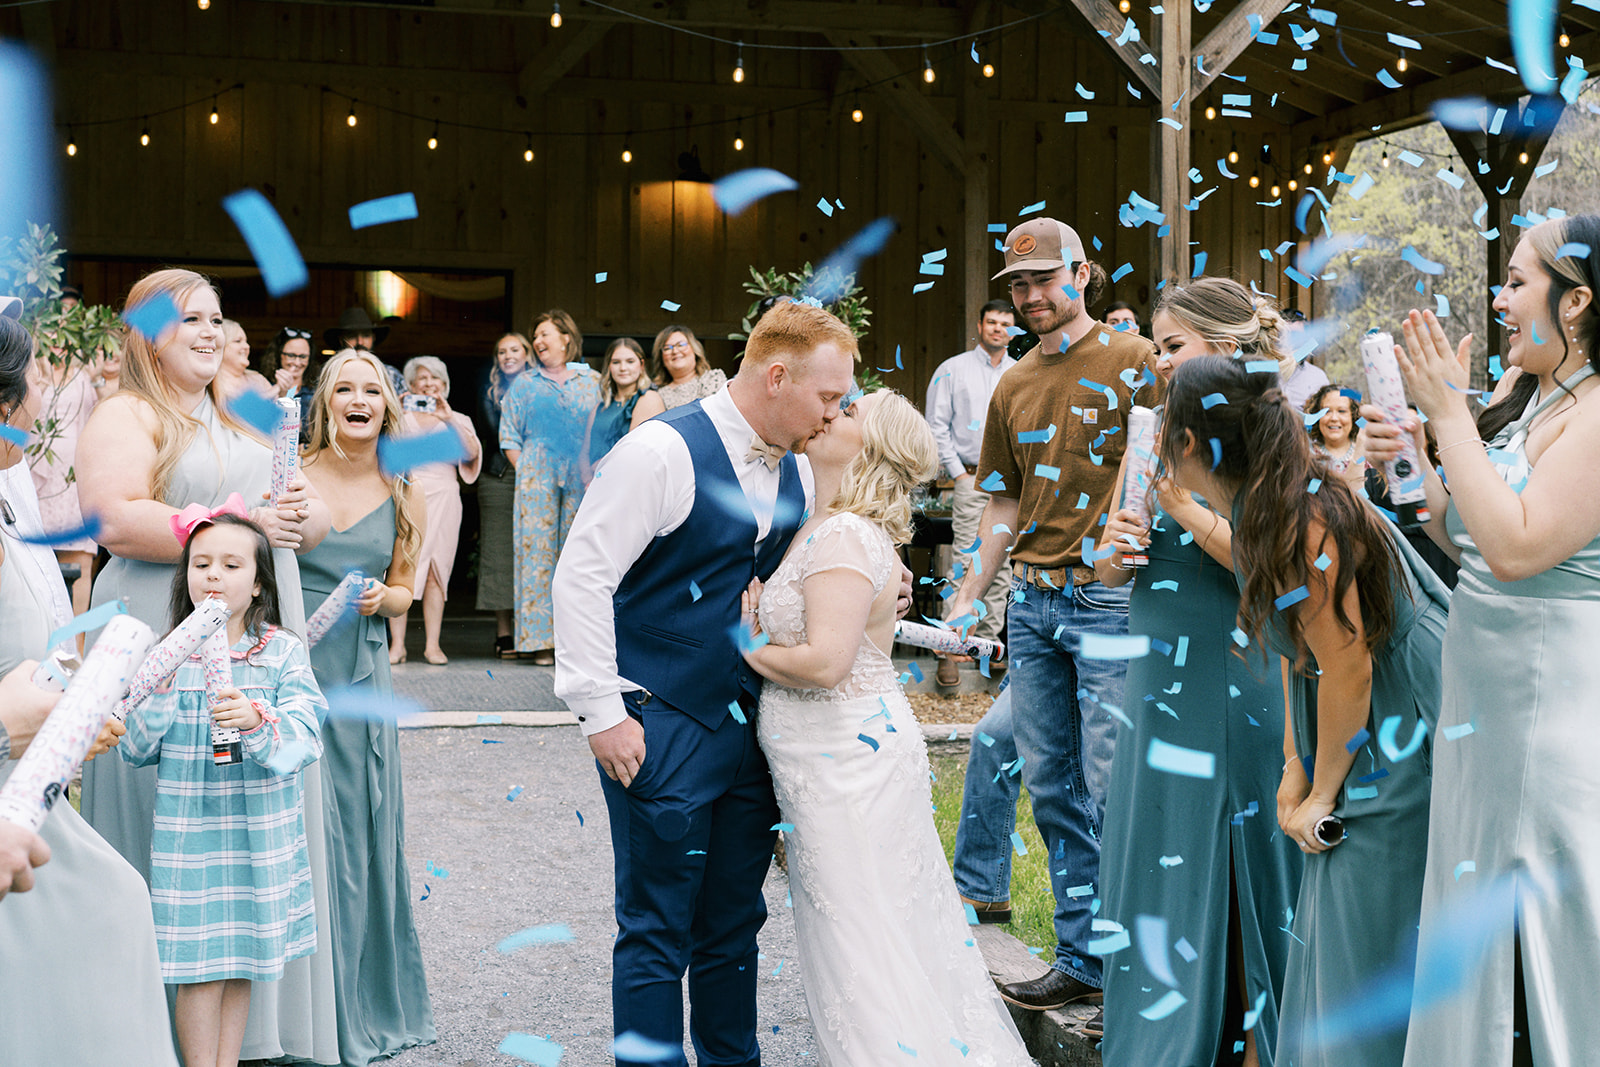 Confetti flies over the bride and groom during their exit at Dry Creek Chapel